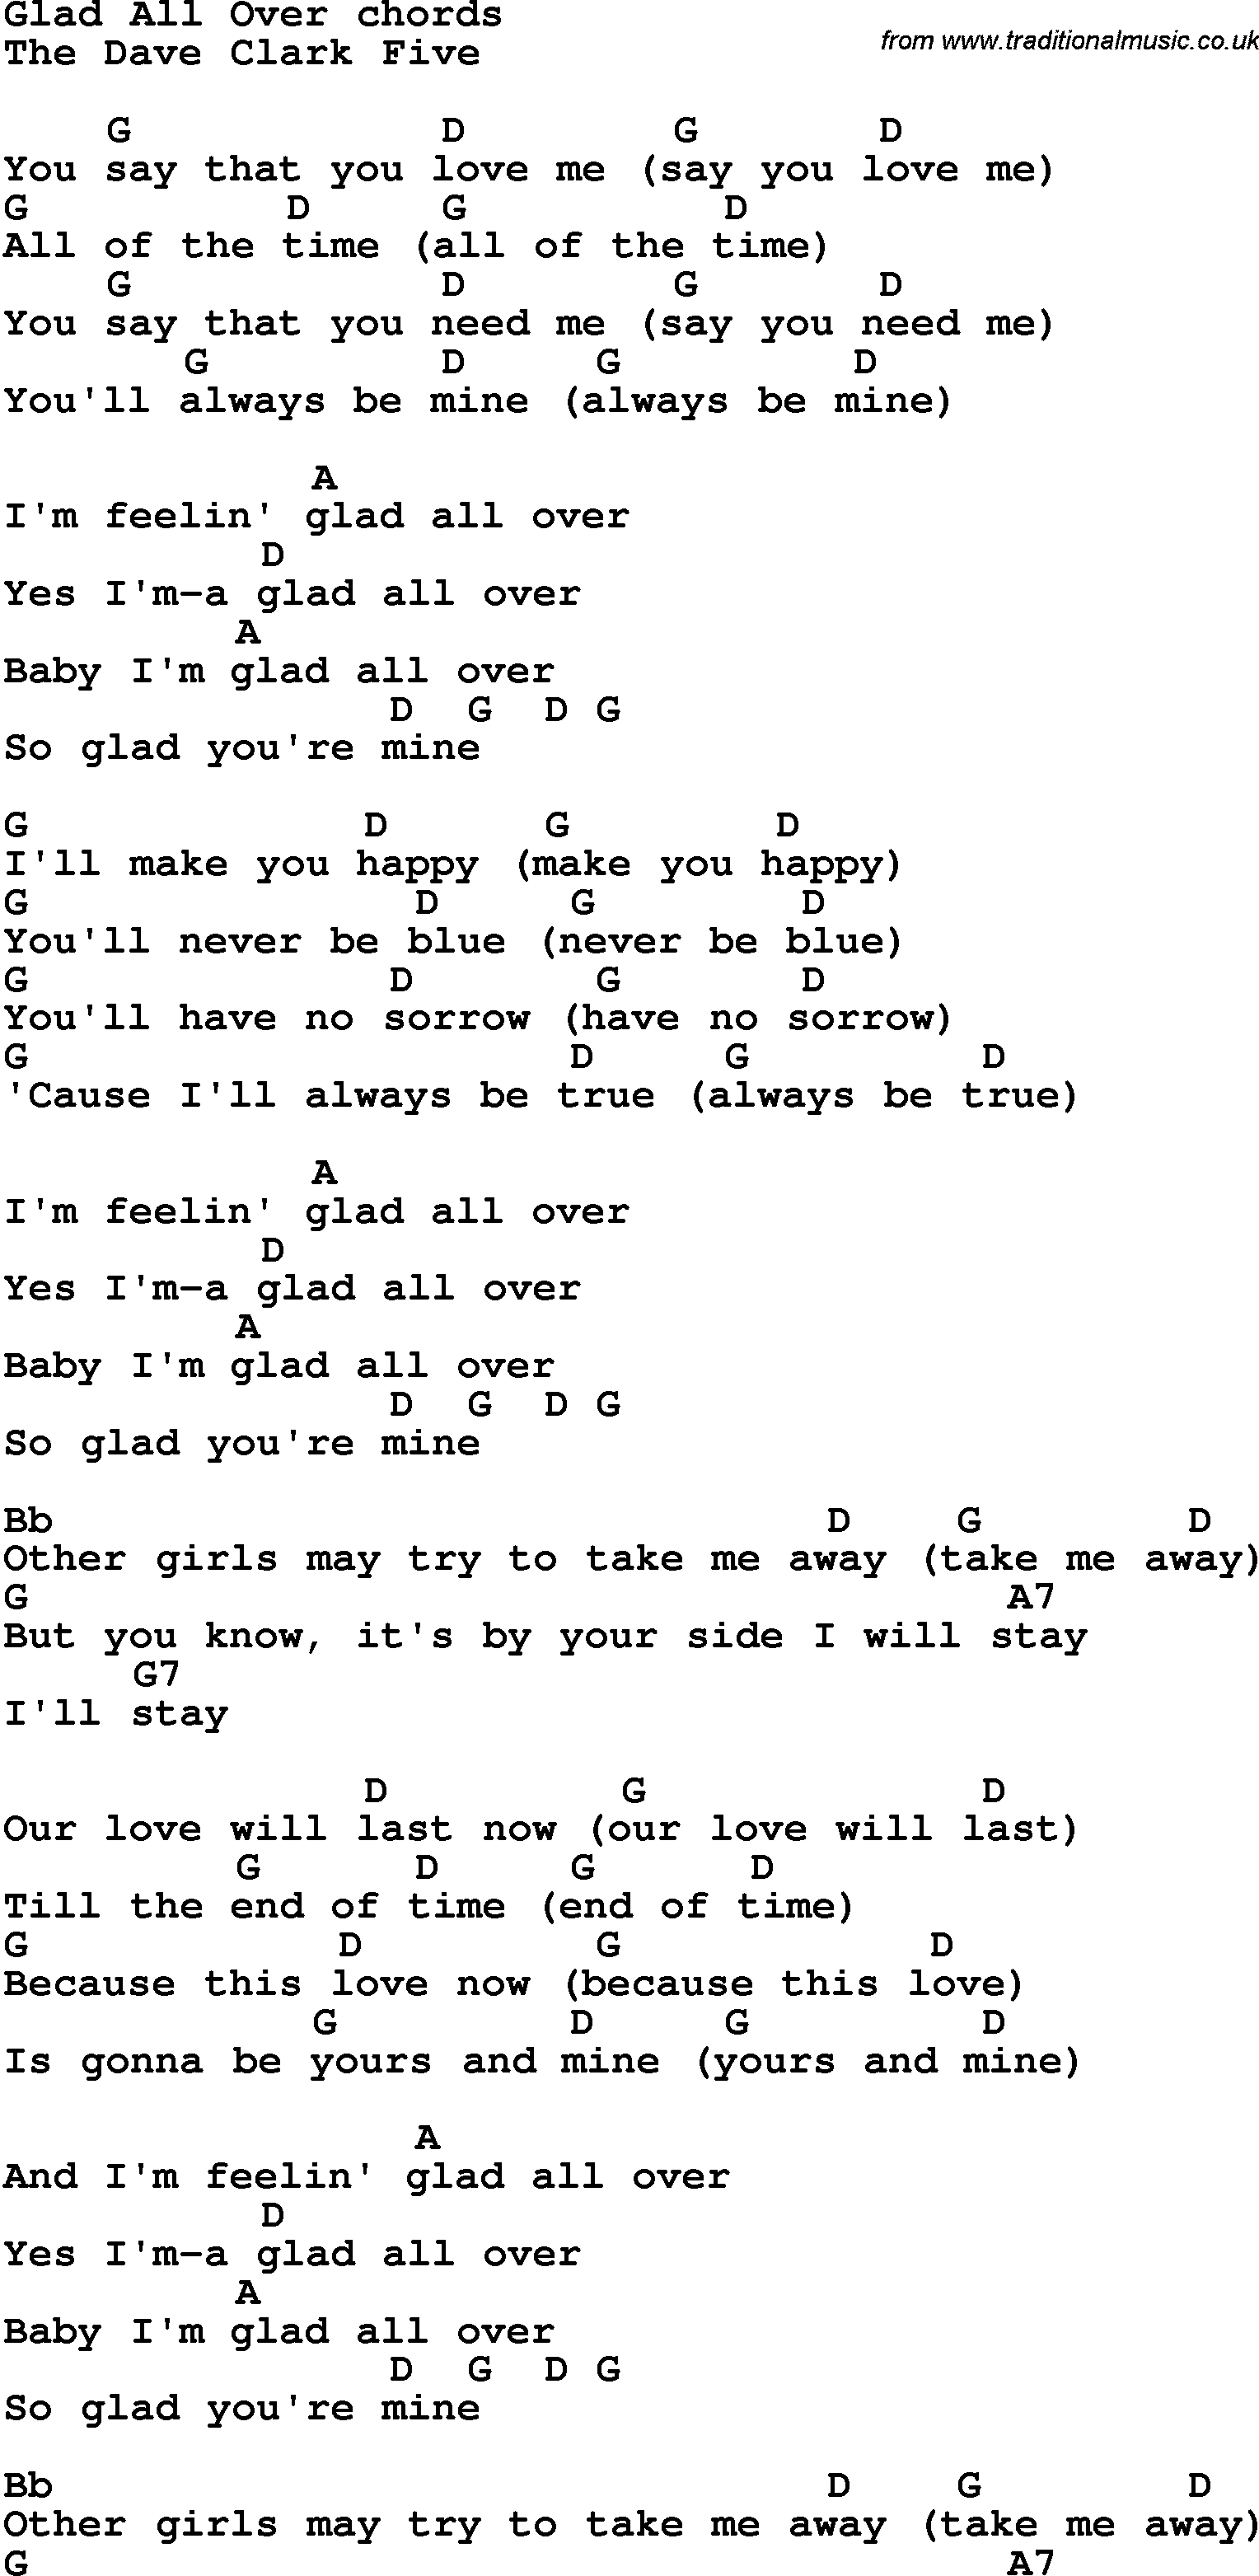 Song Lyrics with guitar chords for Glad All Over